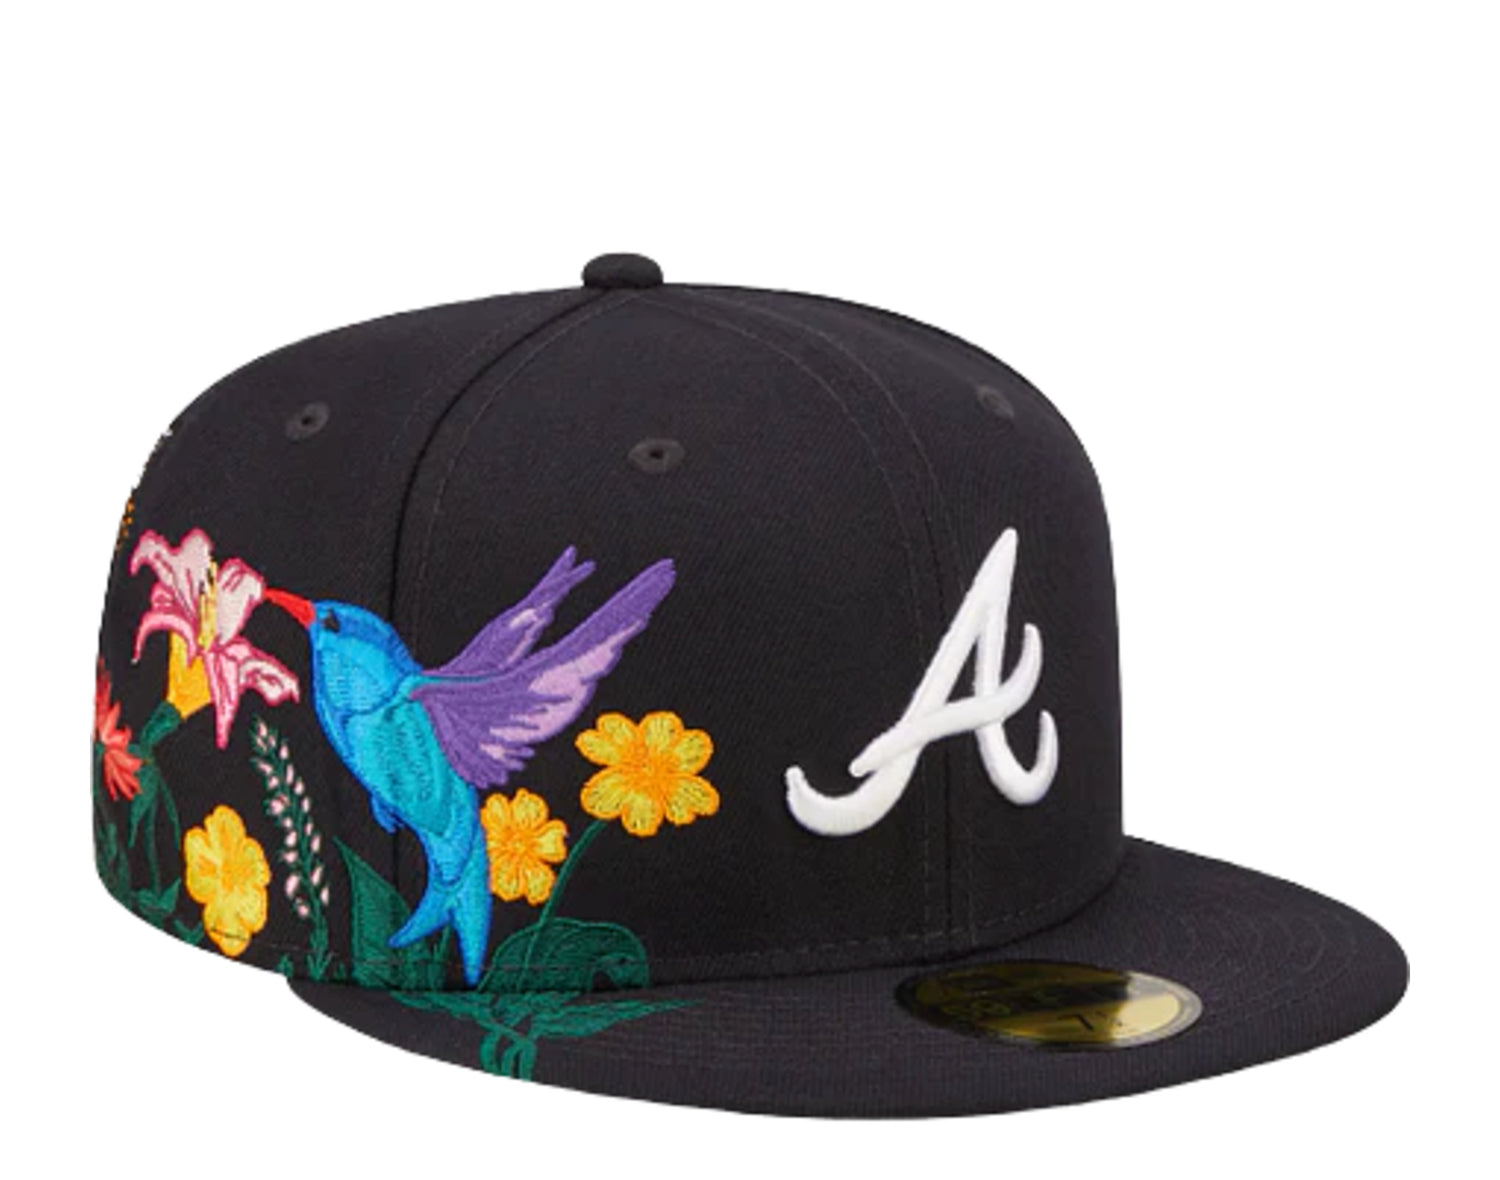 New Era 59Fifty MLB Atlanta Braves Blooming Fitted Hat